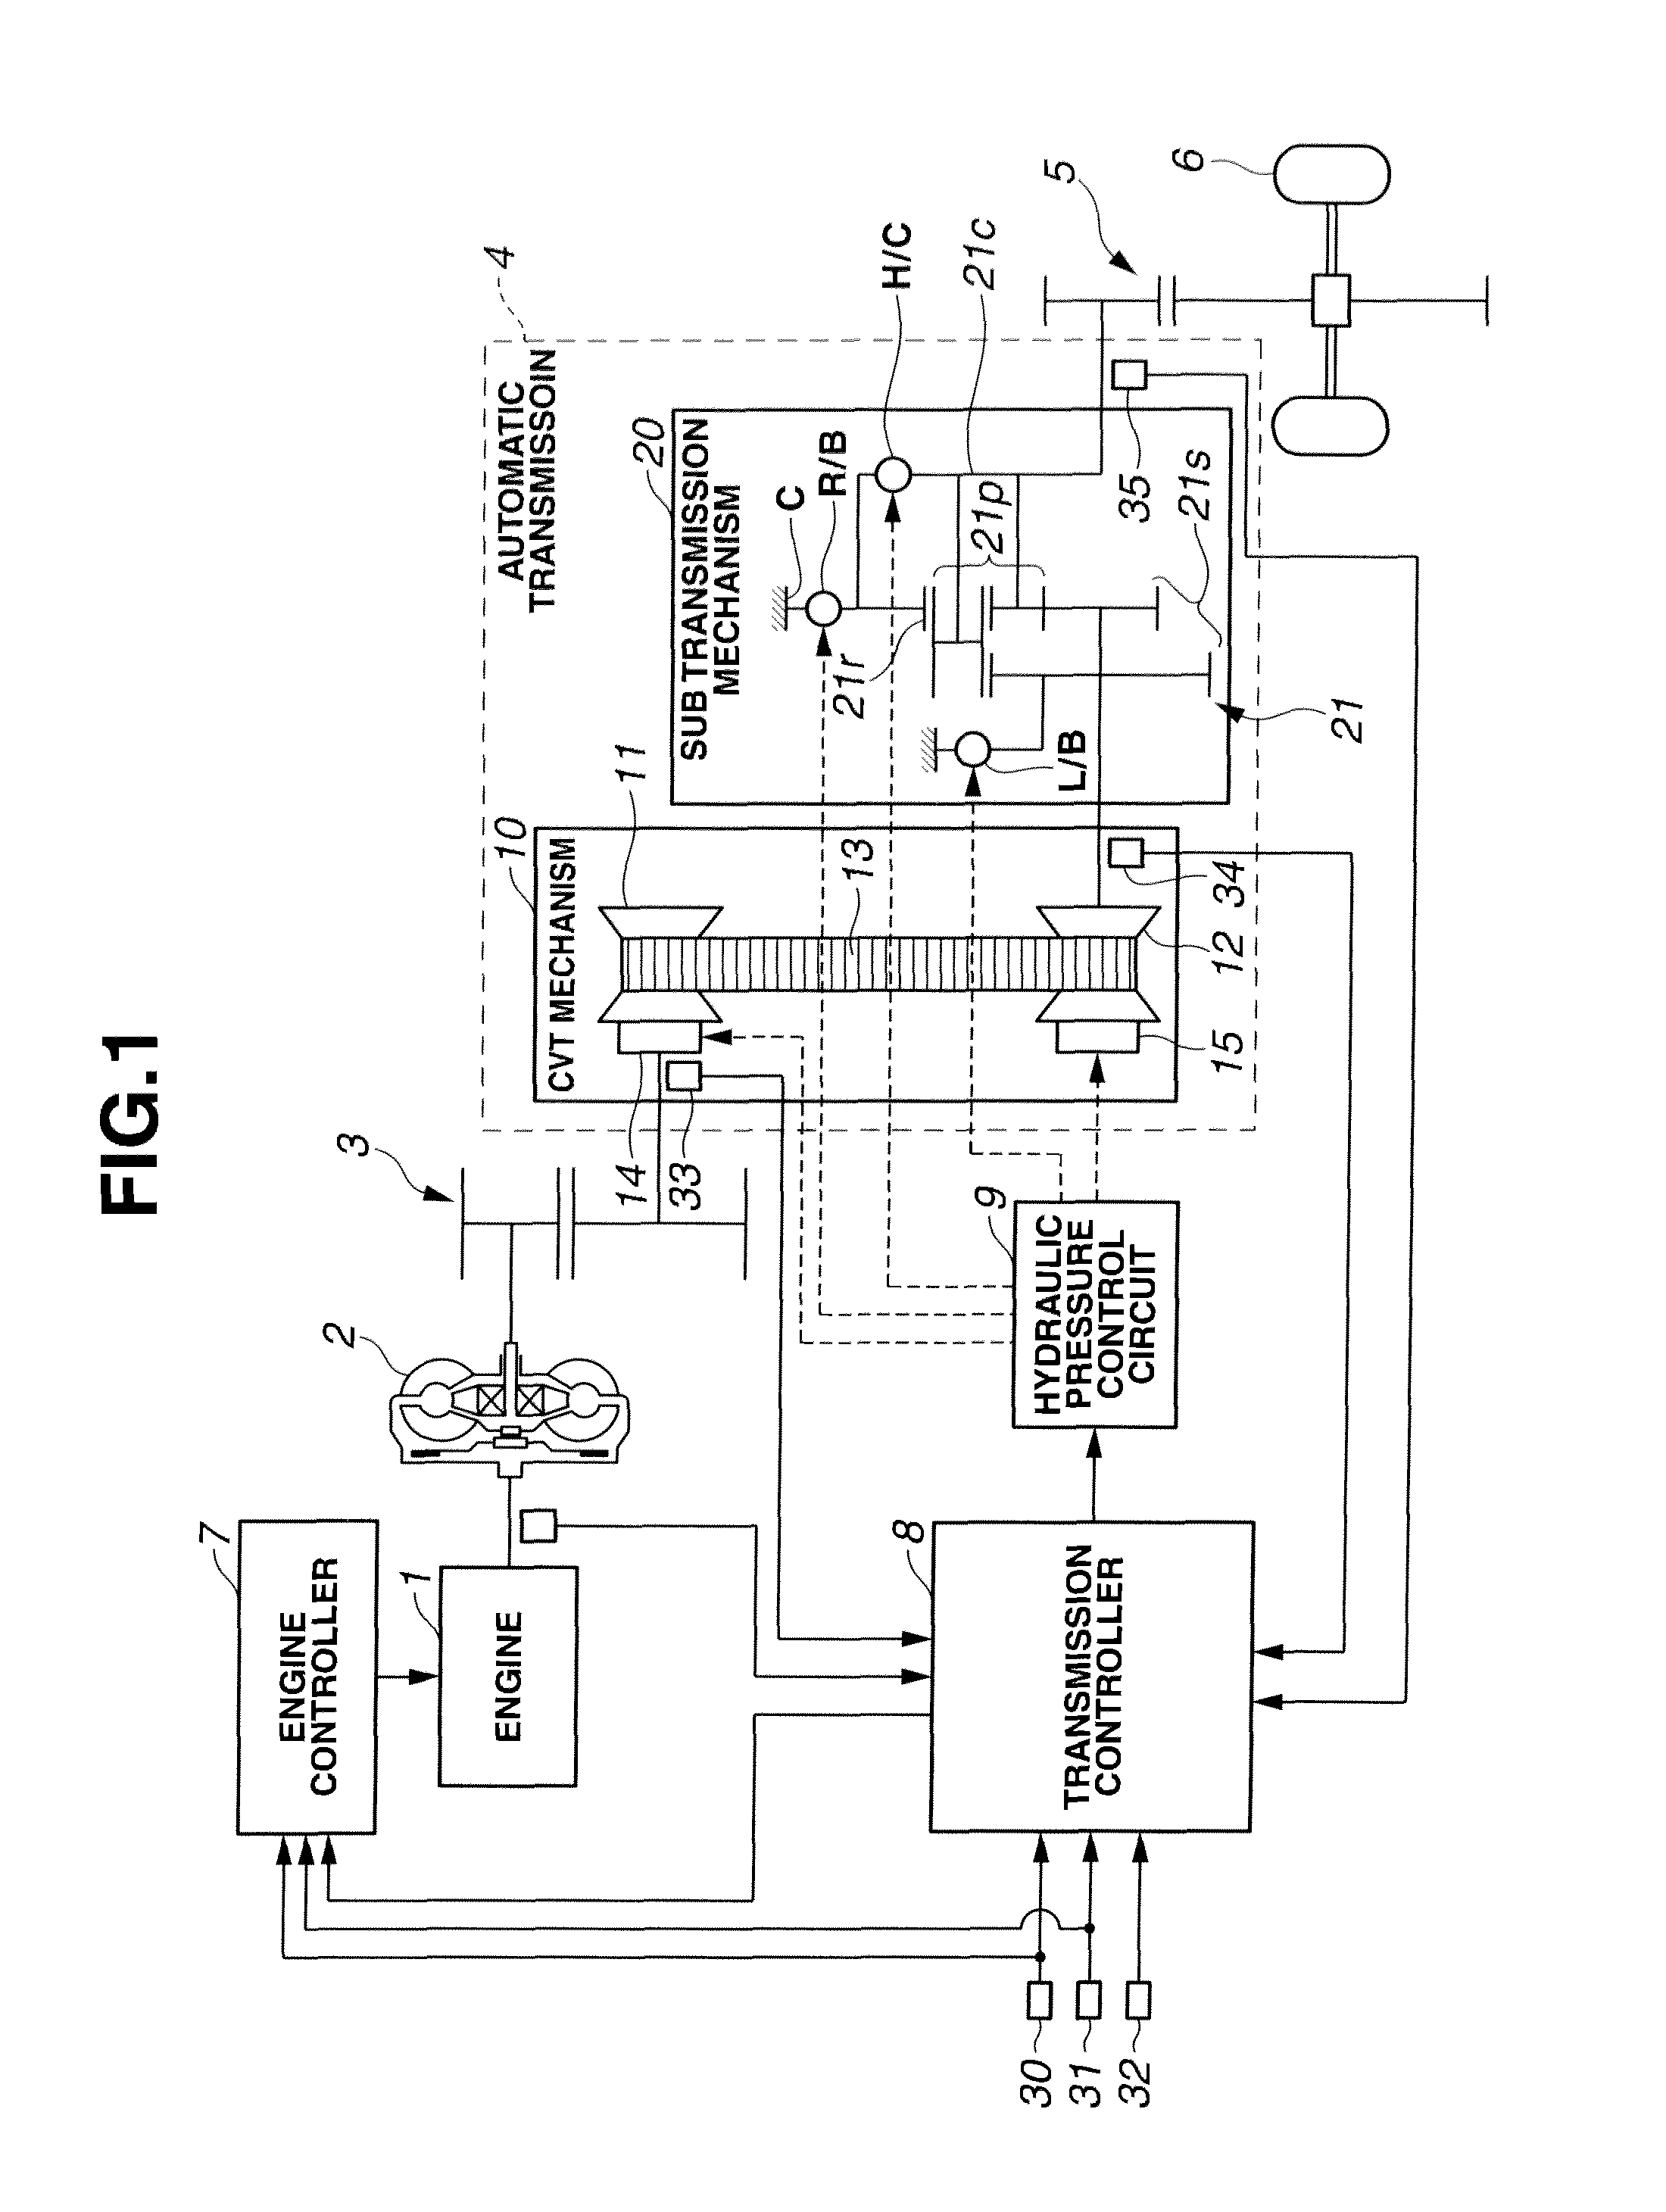 Torque down control apparatus and method for automotive vehicle